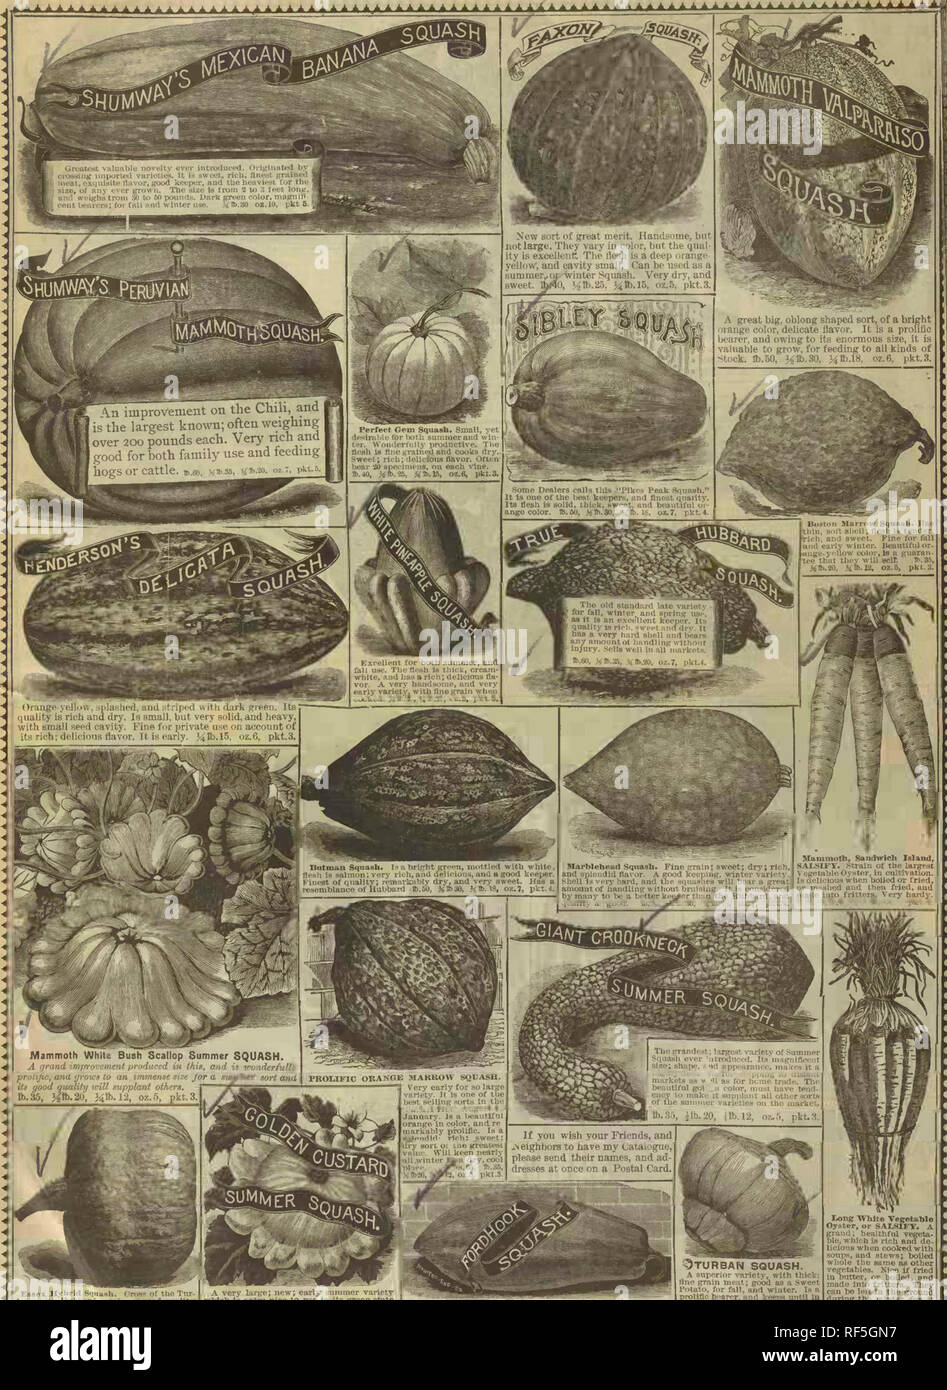 . R.H. Shumway : garden guide. Nursery stock Illinois Rockford Catalogs; Flowers Seeds Catalogs; Vegetables Seeds Catalogs. :1 Essex Hybrid Sfmash. Cross of the Ttir- liaii Tinlli HulJlmrd &gt;tftinin ' yiod quallt&quot;^ Of both. Fine qnaiitj- and goodiceeper its Sesh is thick; rich, ud sweet. Pair size. Stib.eo, ft 30, }^ib.da, iiib is, OZ.7, pkt.*. A very large; new; early summer varirtv which is extra nine to use in its green state, ana nice A snpc.rior variety, with thick; line groin meal; good as a Sweet Potato, for fall, and winter. Is a proitflc hearer, and keei&gt;s vmtU in untU it is Stock Photo